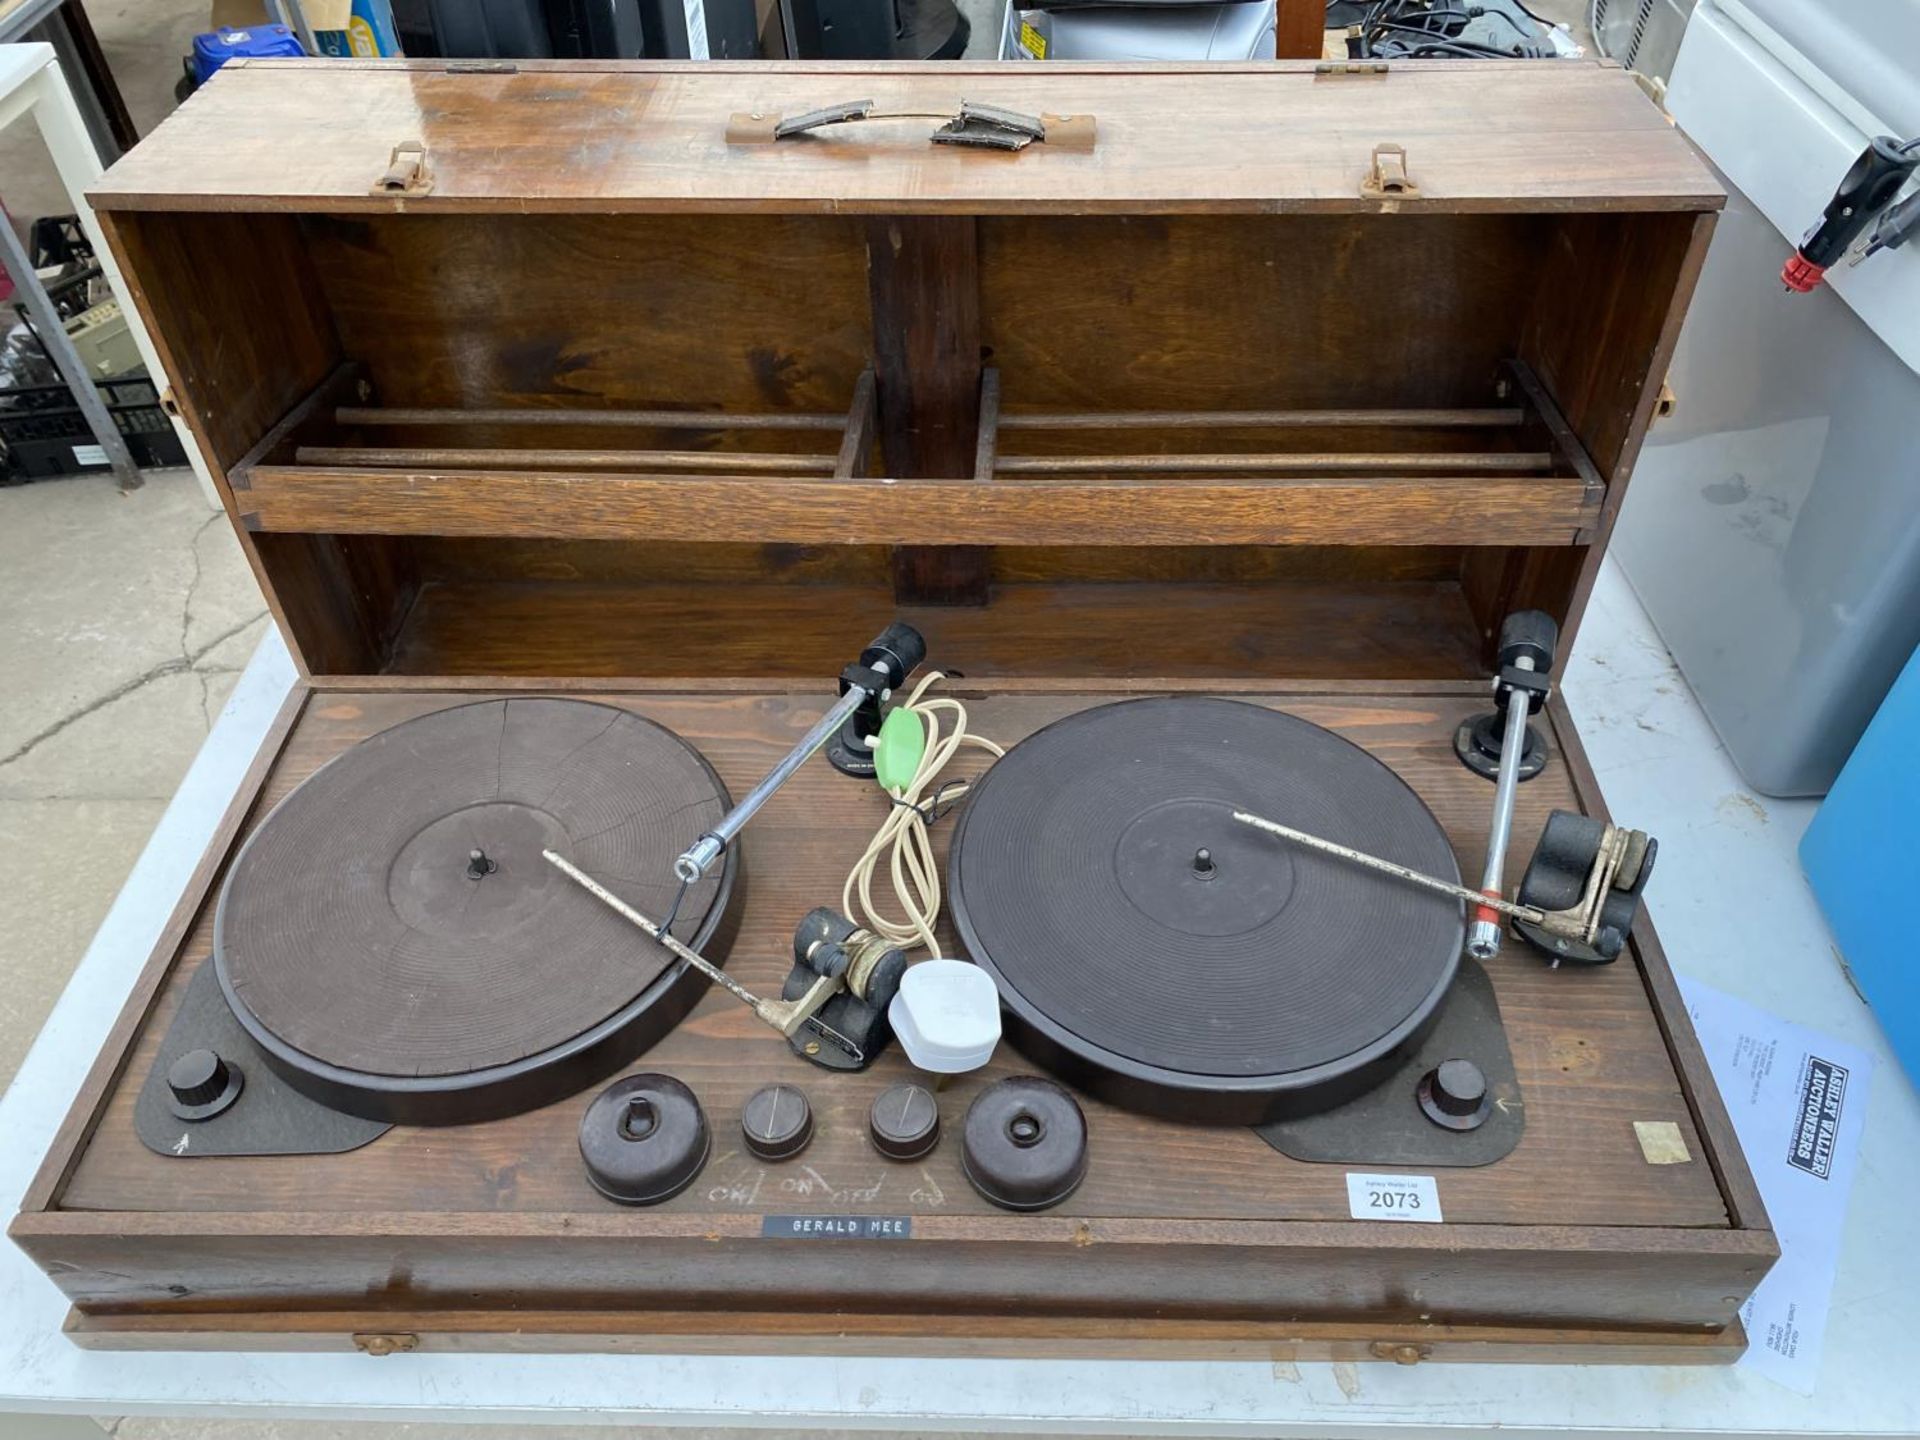 A WOODEN CASED VINTAGE RECORD PLAYER